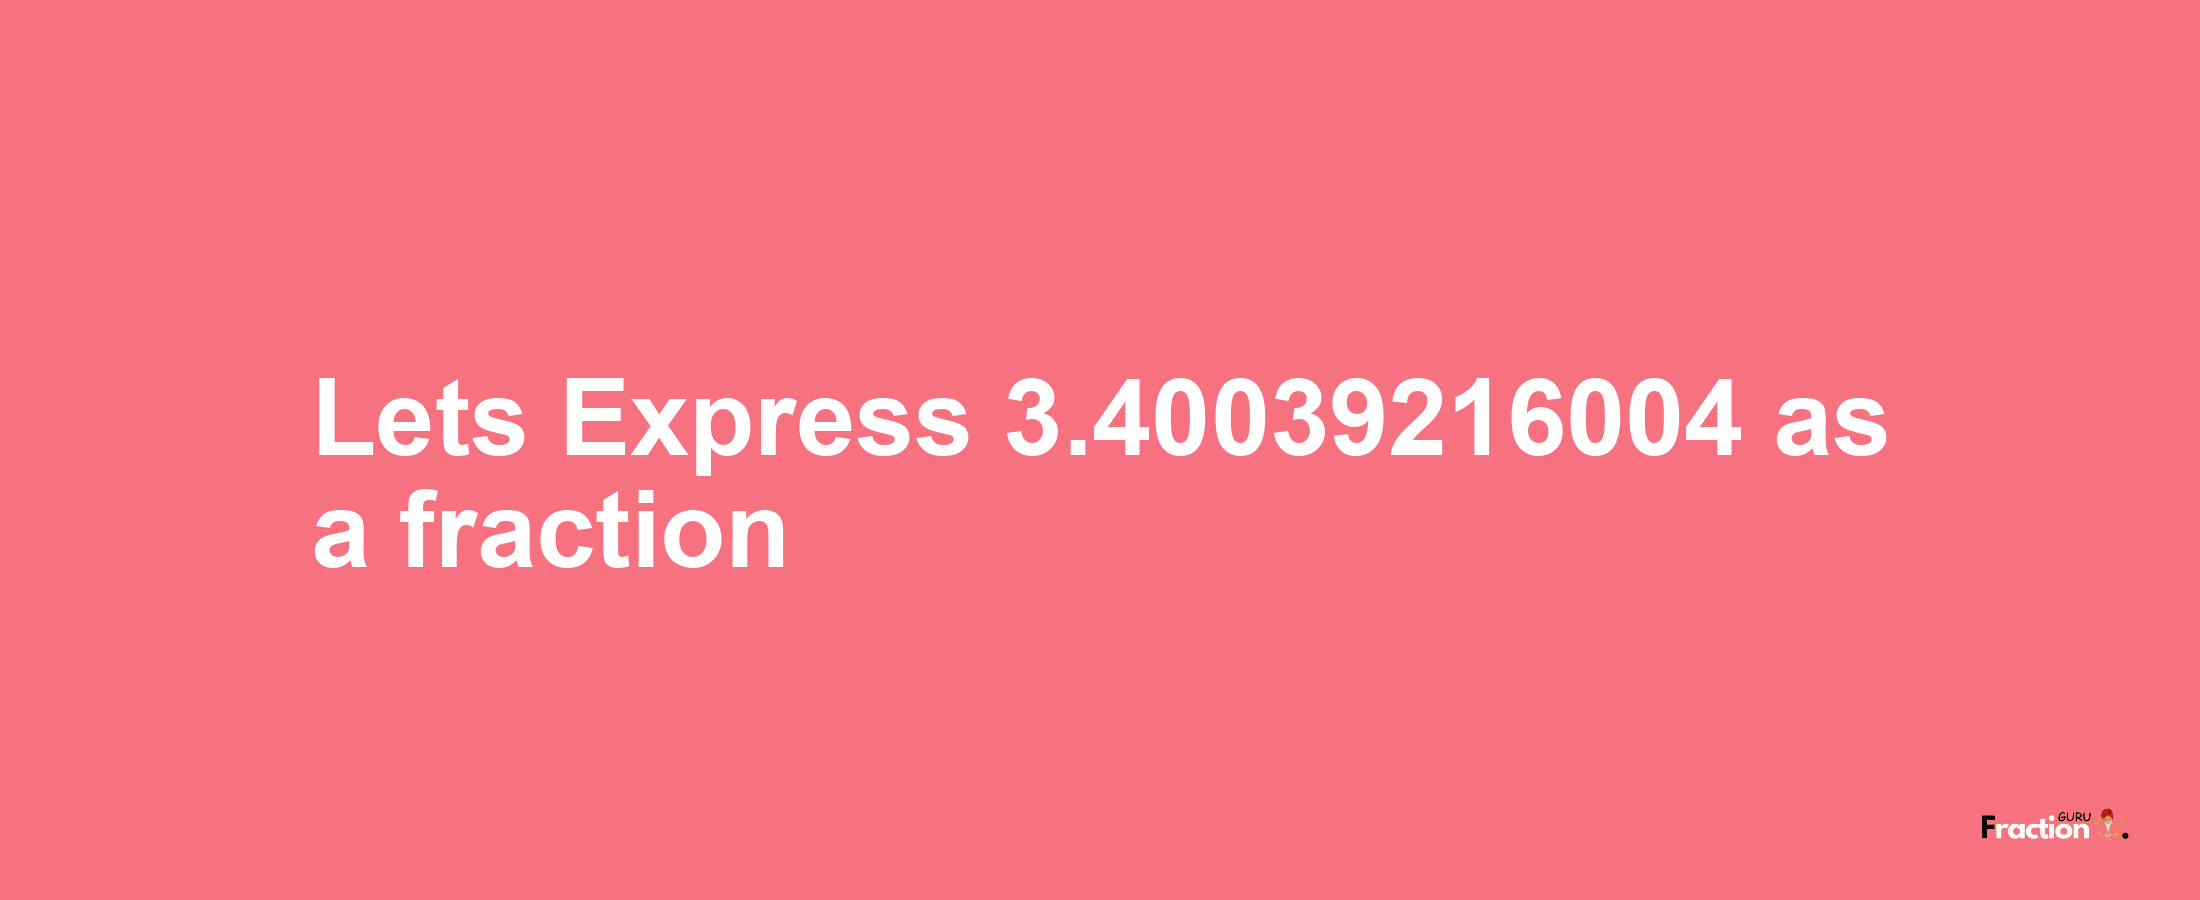 Lets Express 3.40039216004 as afraction